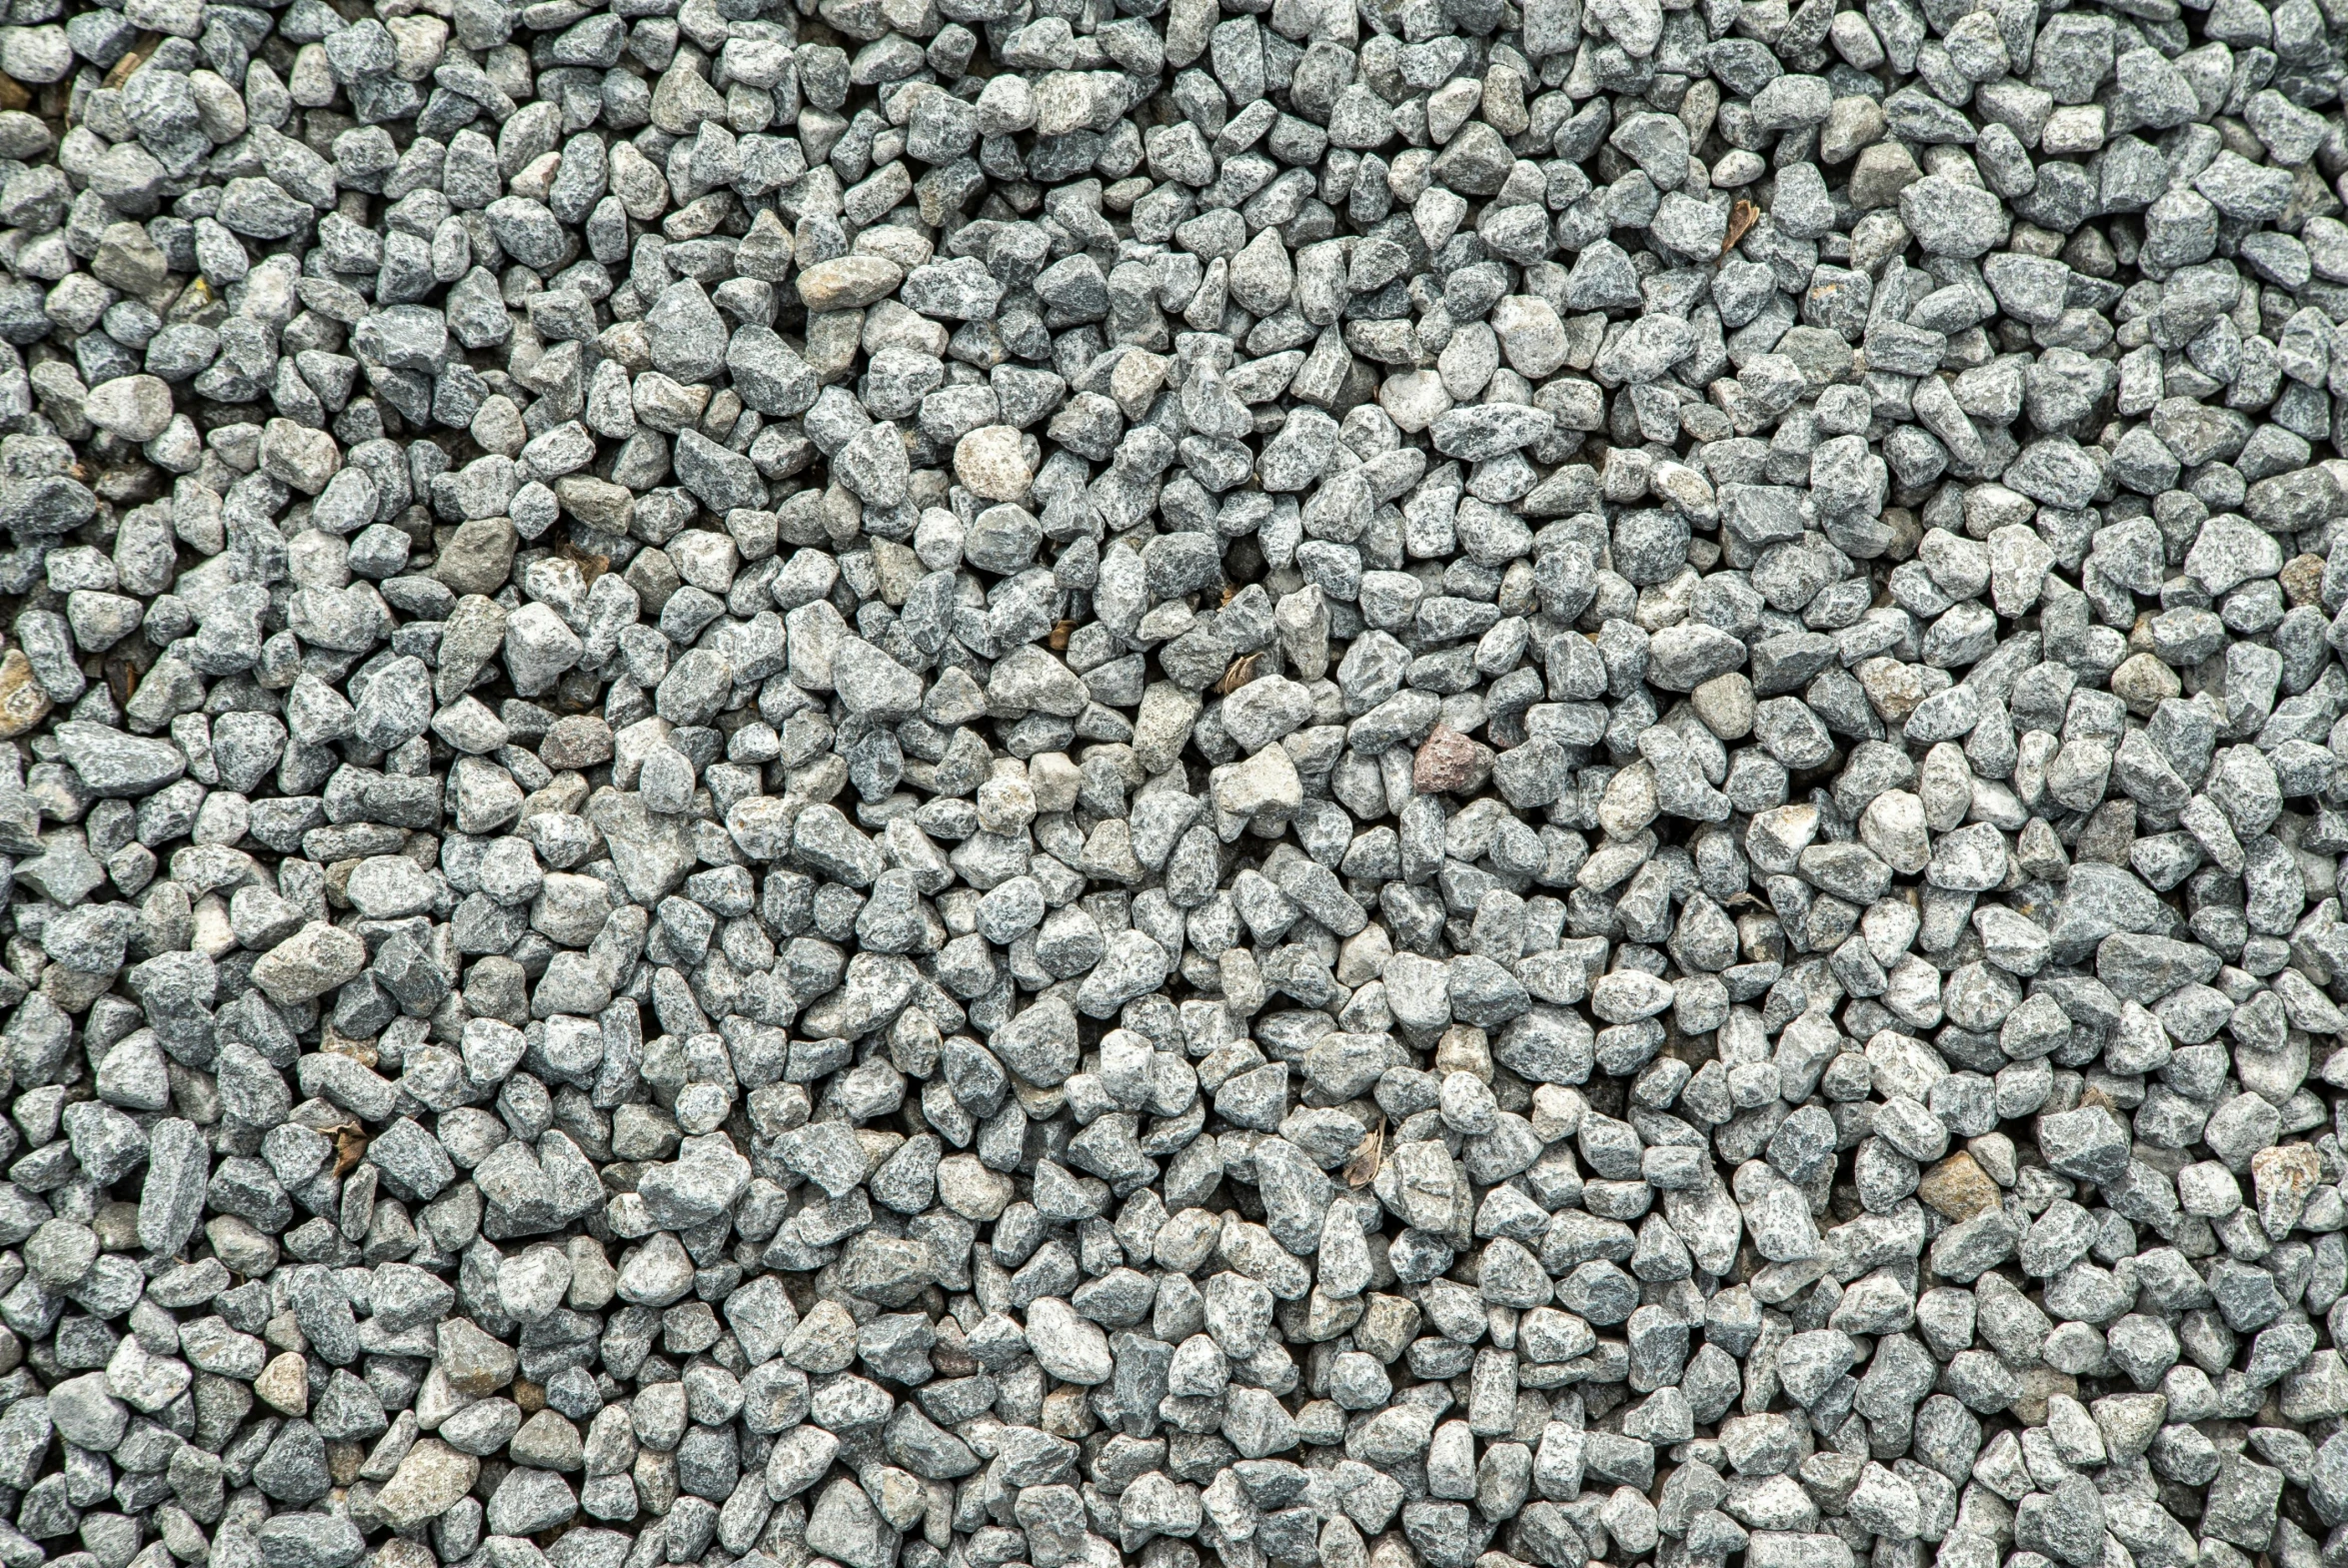 a gray rock is surrounded by small pebbles